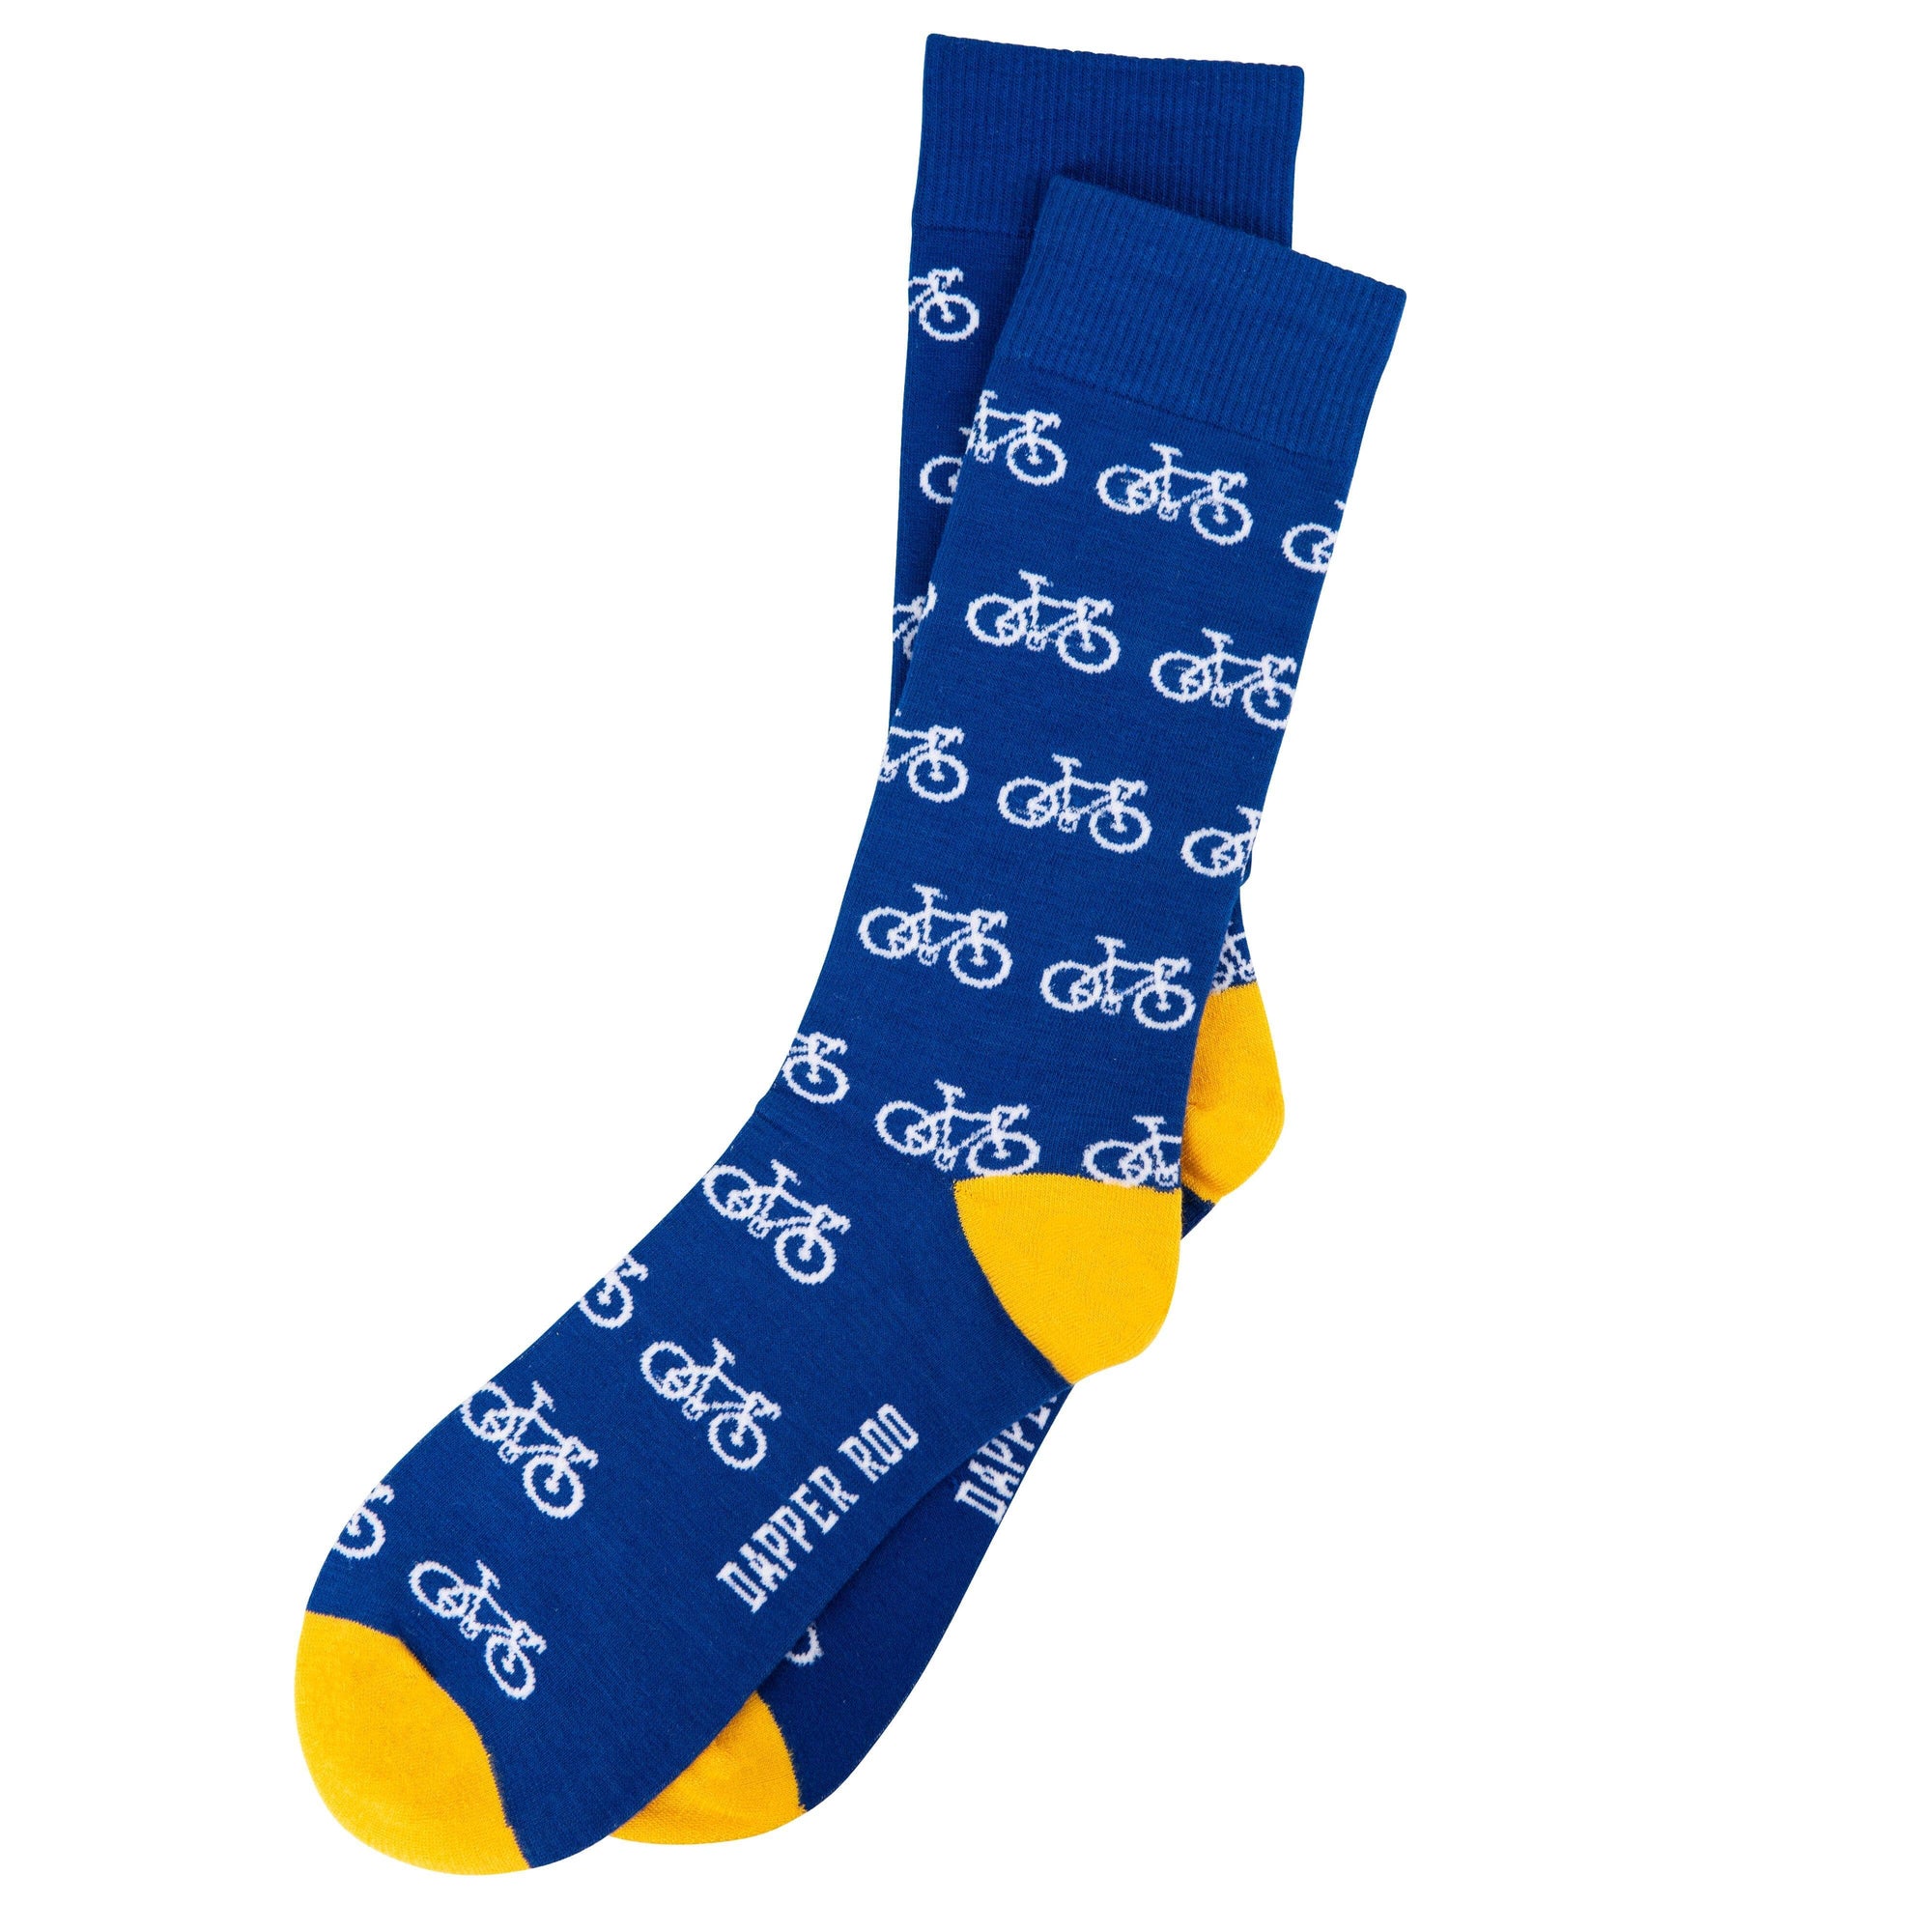 Ride On Bicycle Cycling Bamboo Socks by Dapper Roo Socks Dapper Roo Default 